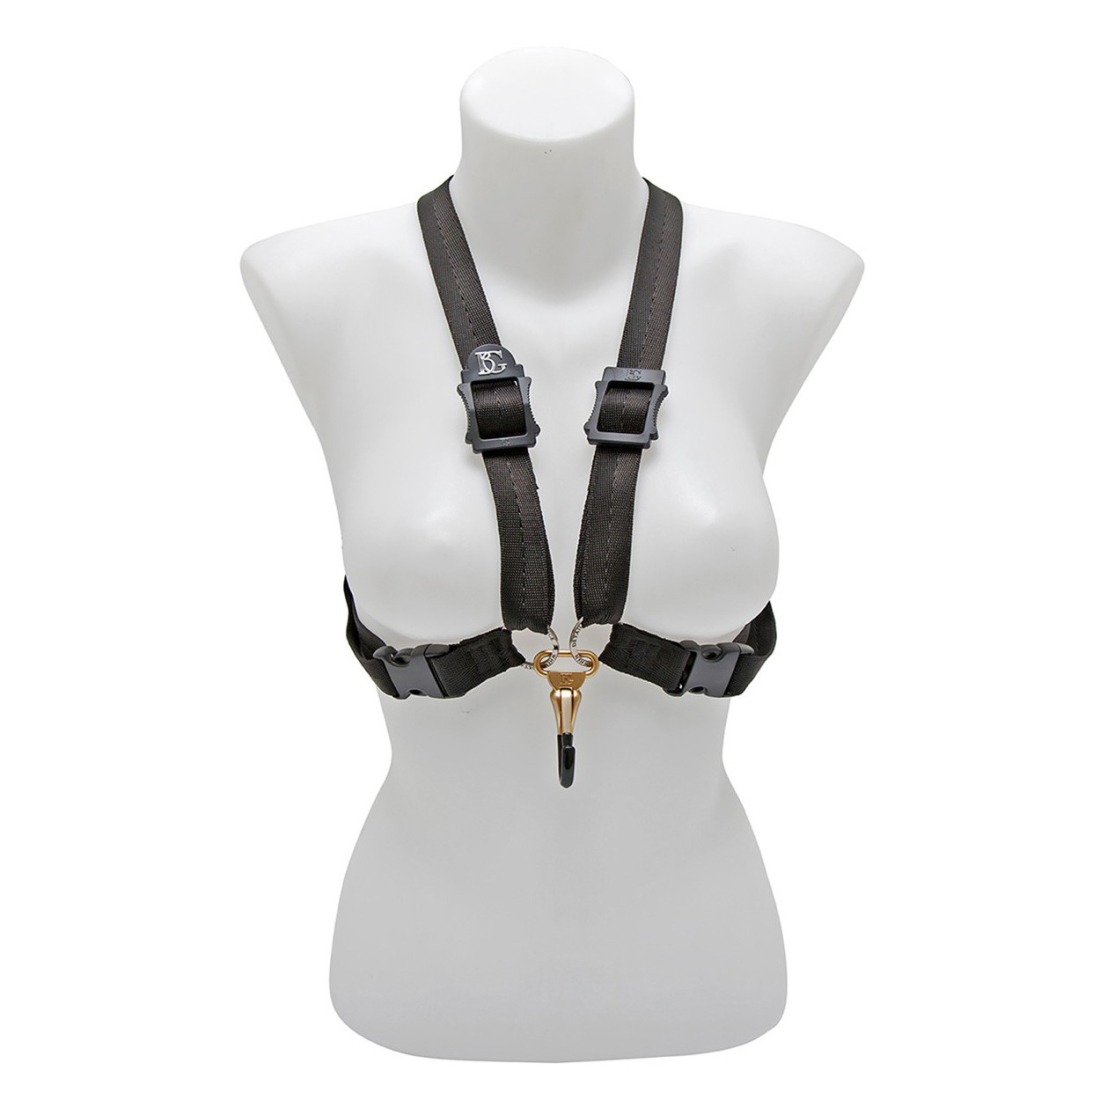 Saxophone Harness Strap with Metal Snap - Female